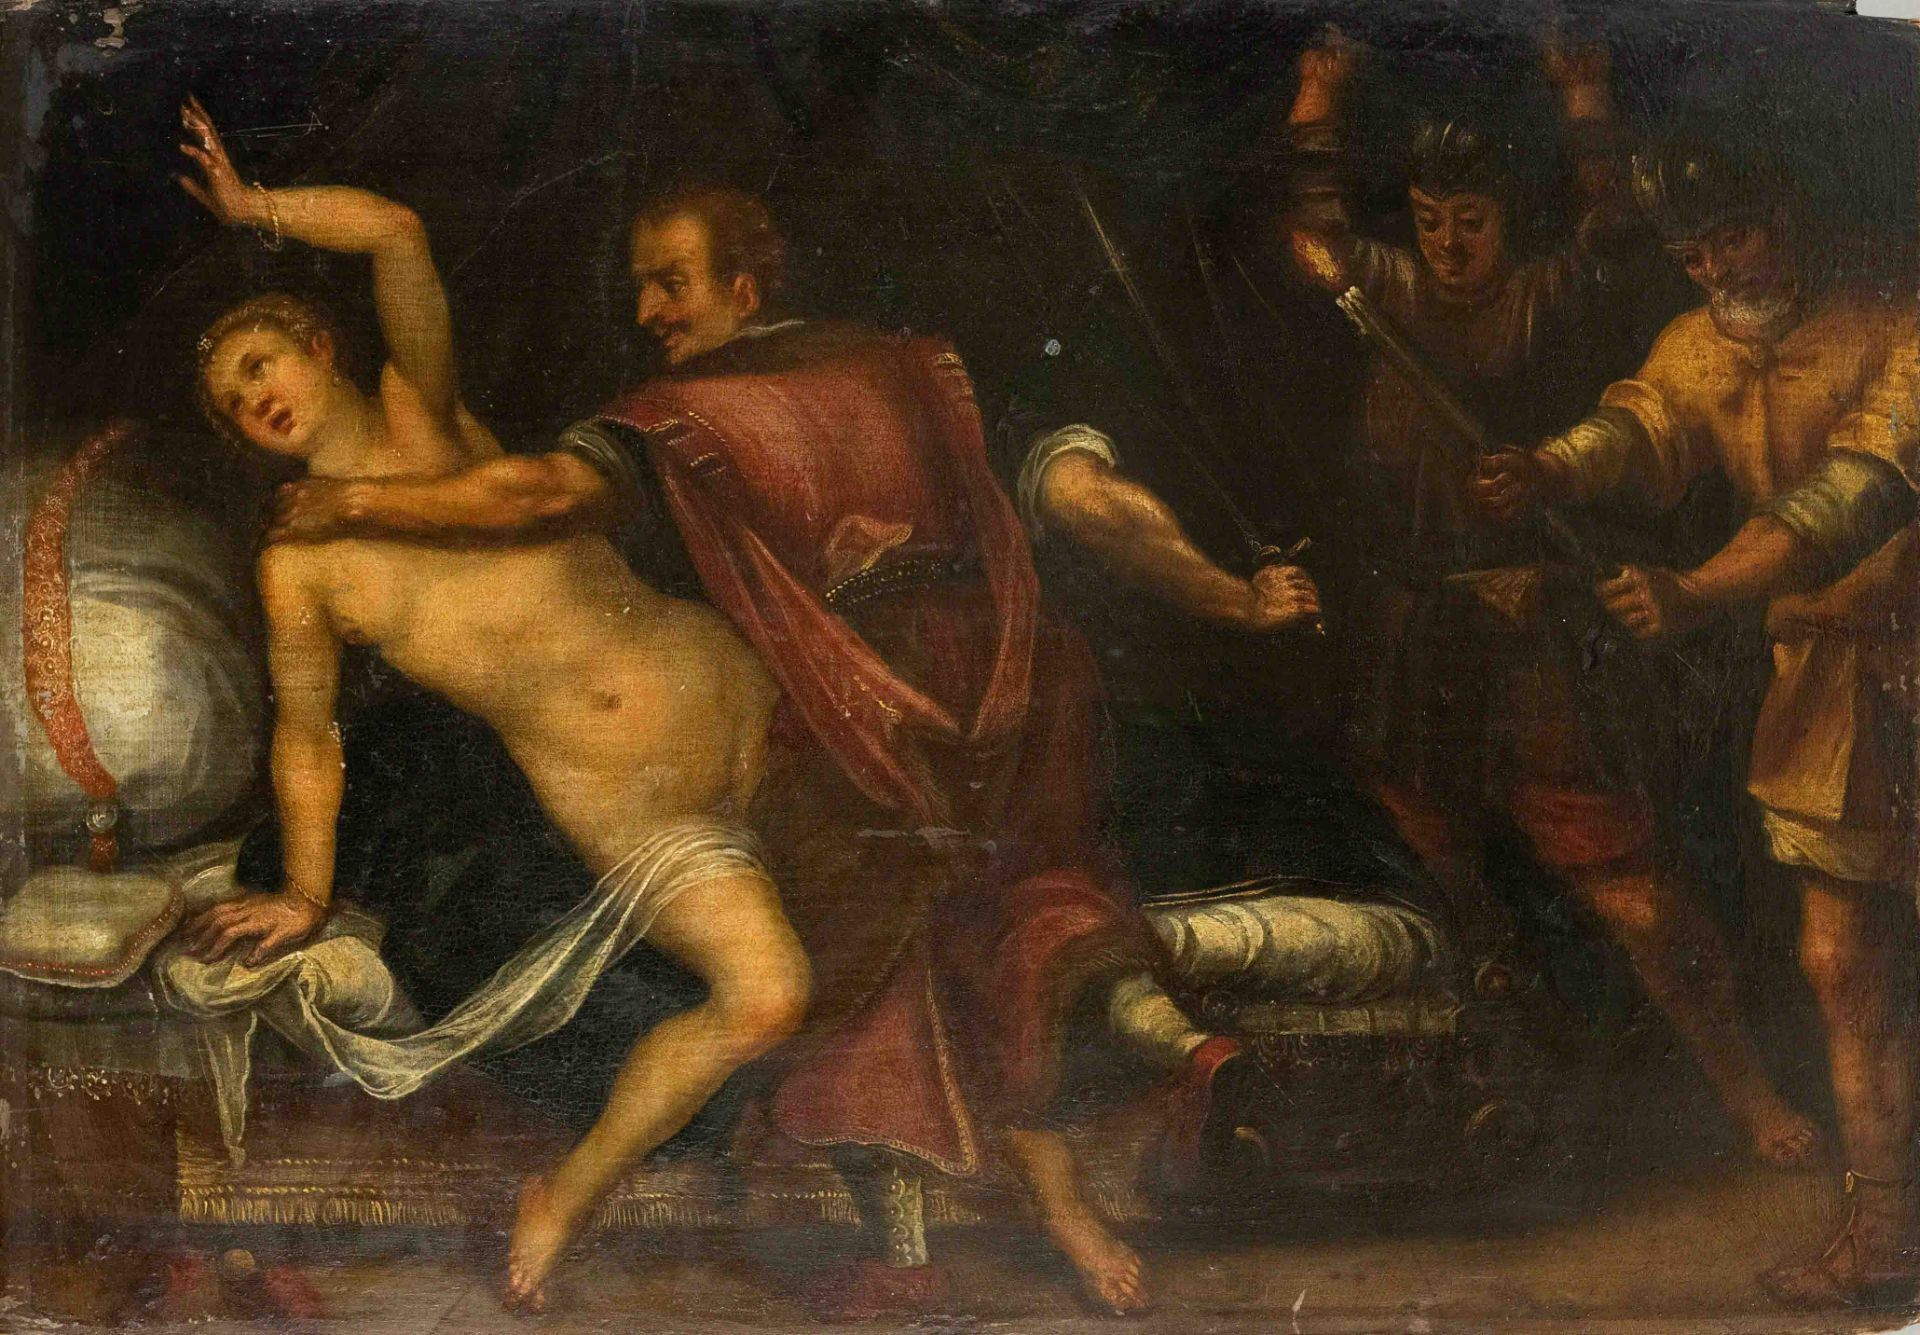 Italian Old Master of the 16th century, biblical scene depicting the murder of a woman who is